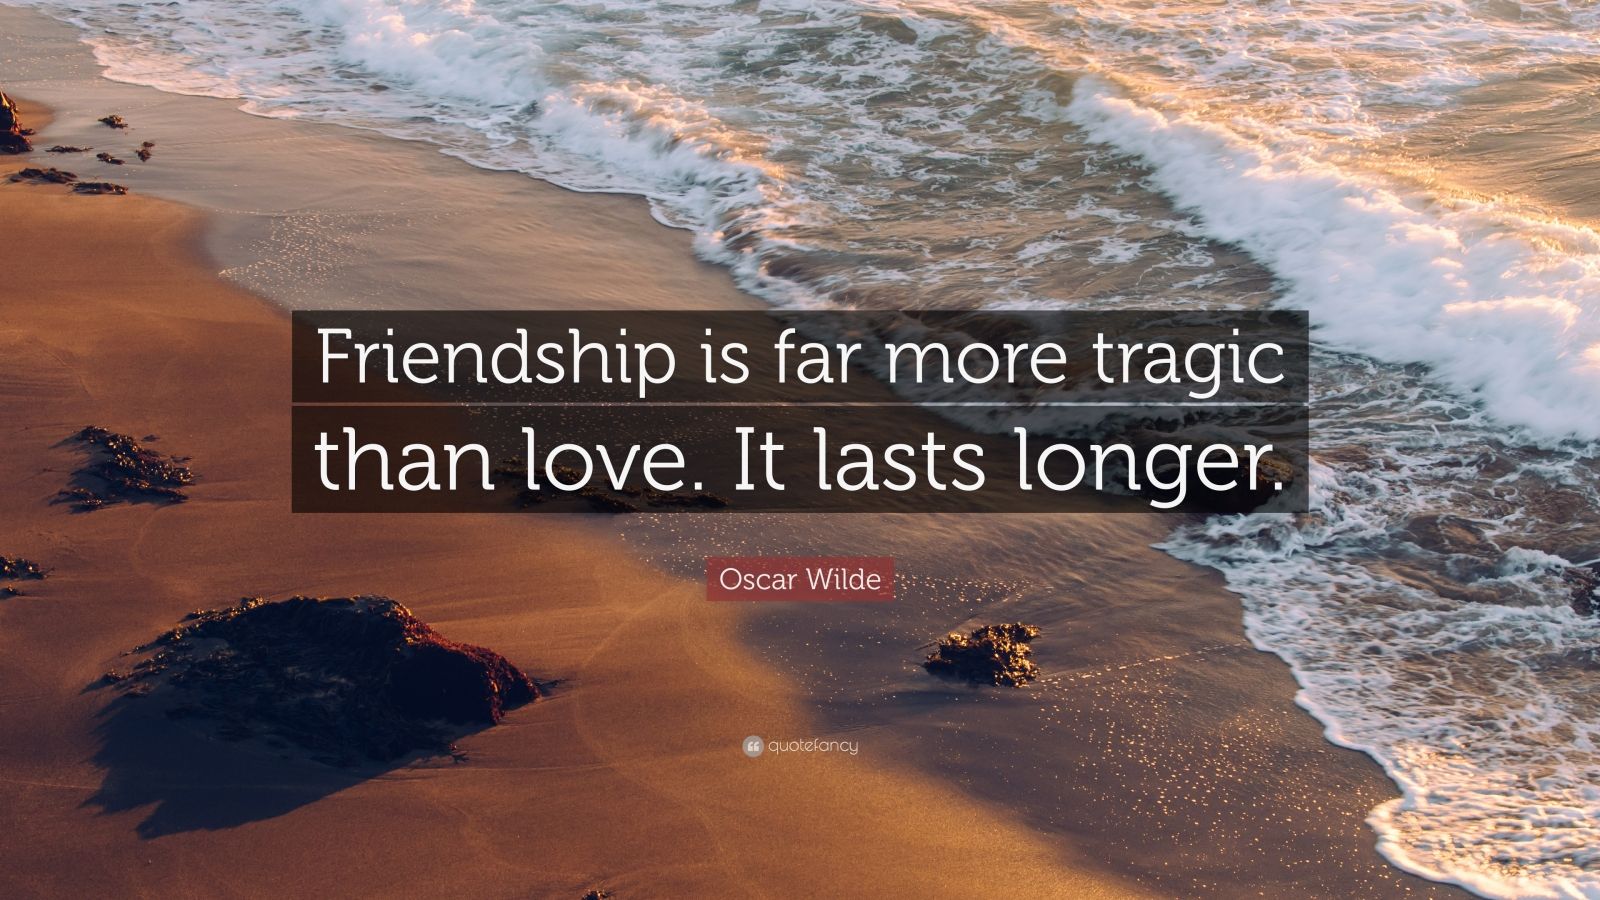 Oscar Wilde Quote: “Friendship is far more tragic than love. It lasts